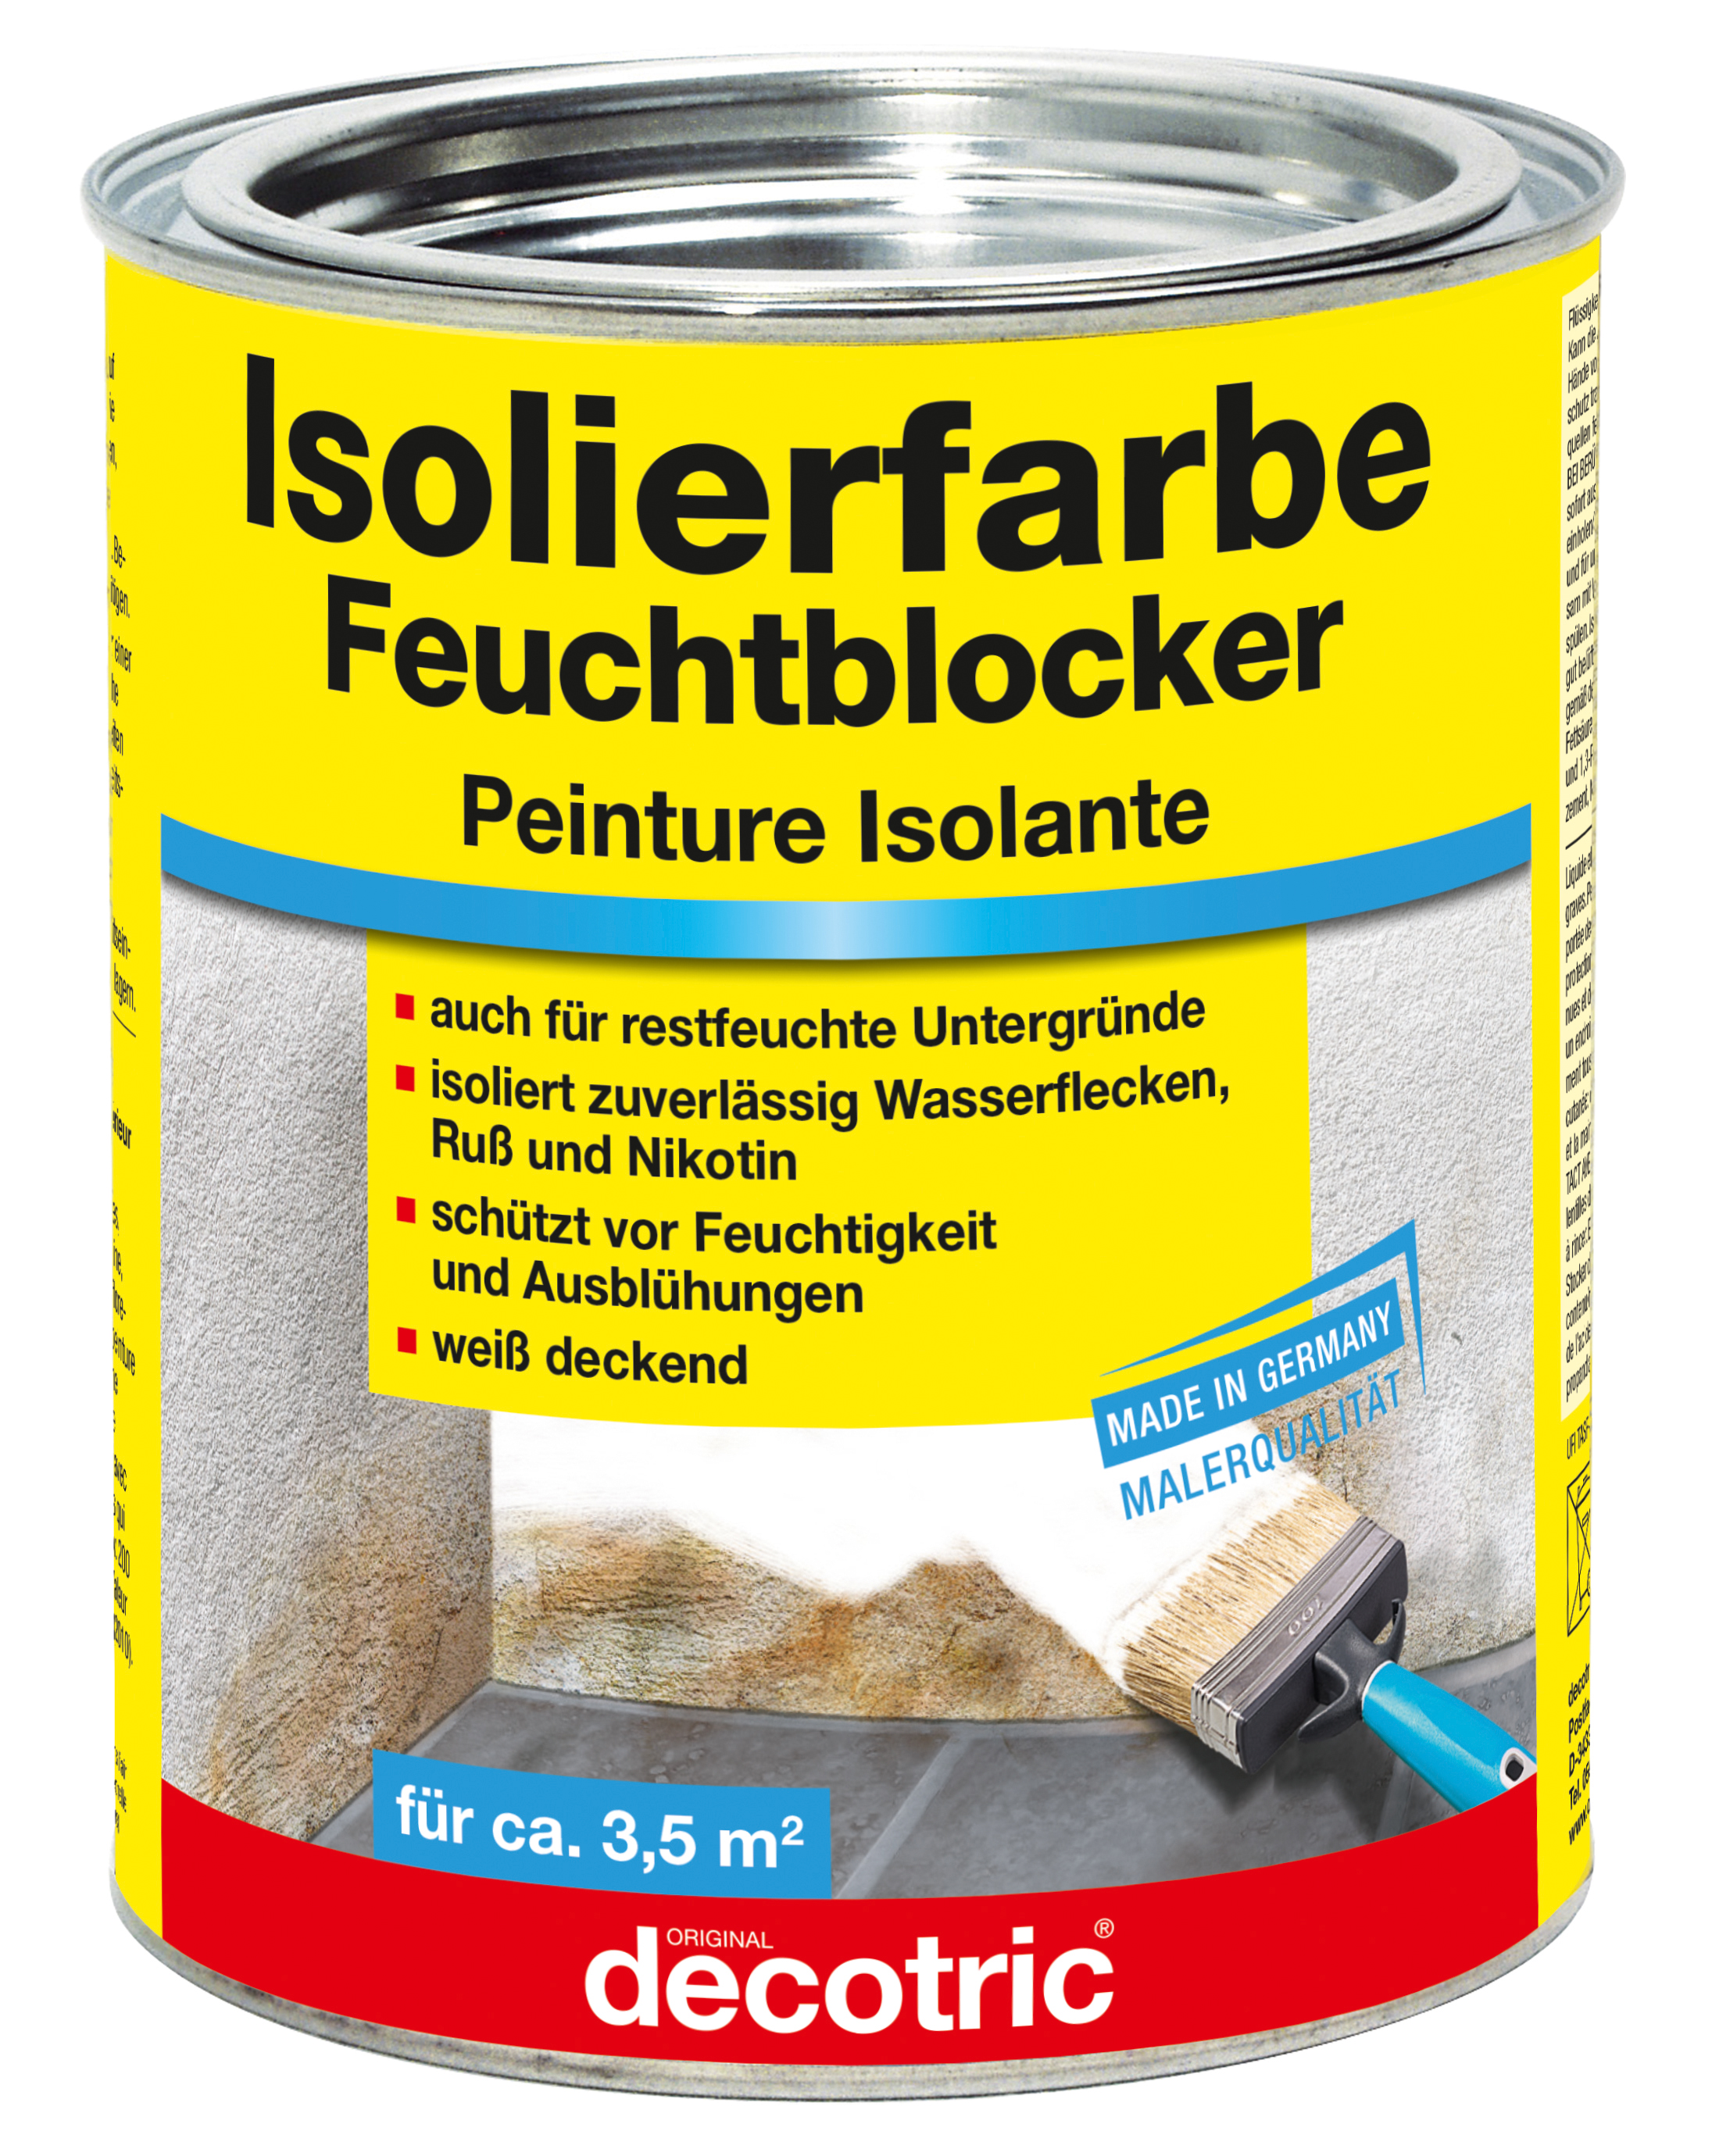 DECOTRIC Isolierfarbe 750ml decotric